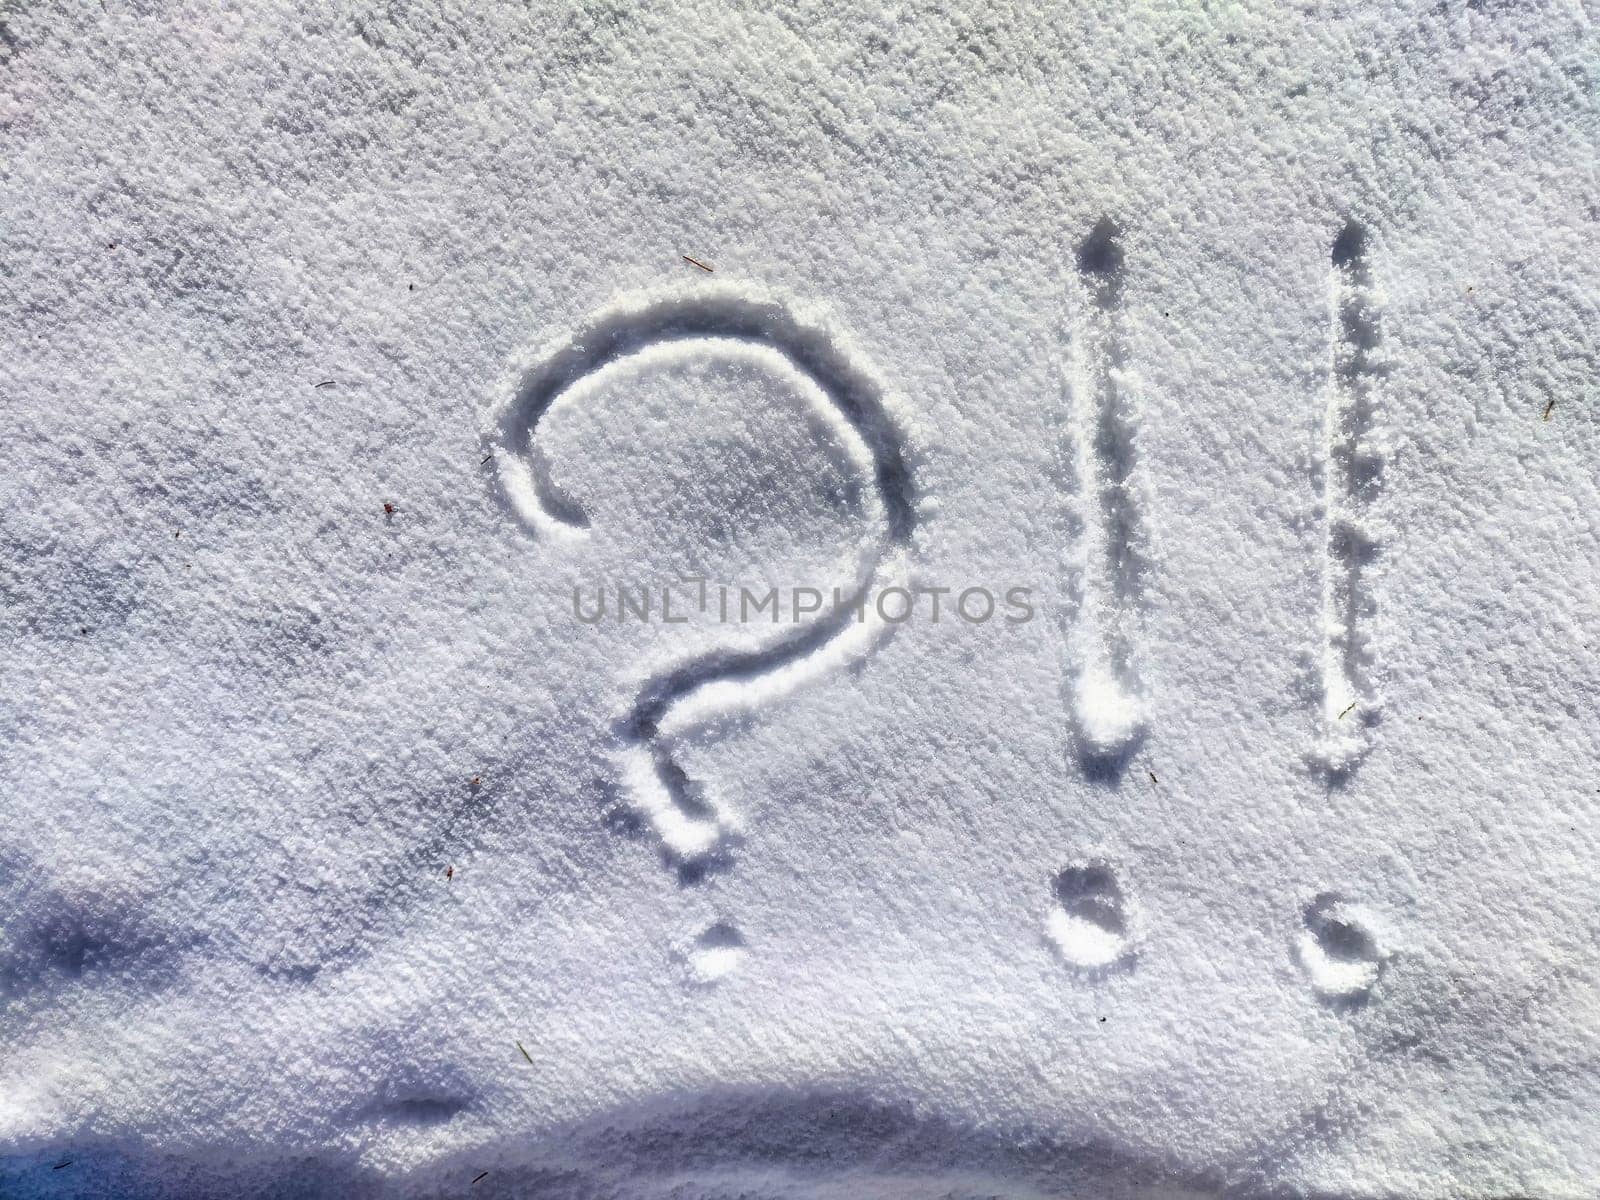 A large question mark is etched into the fresh snow, creating a stark contrast against the white surface on a serene winter morning.